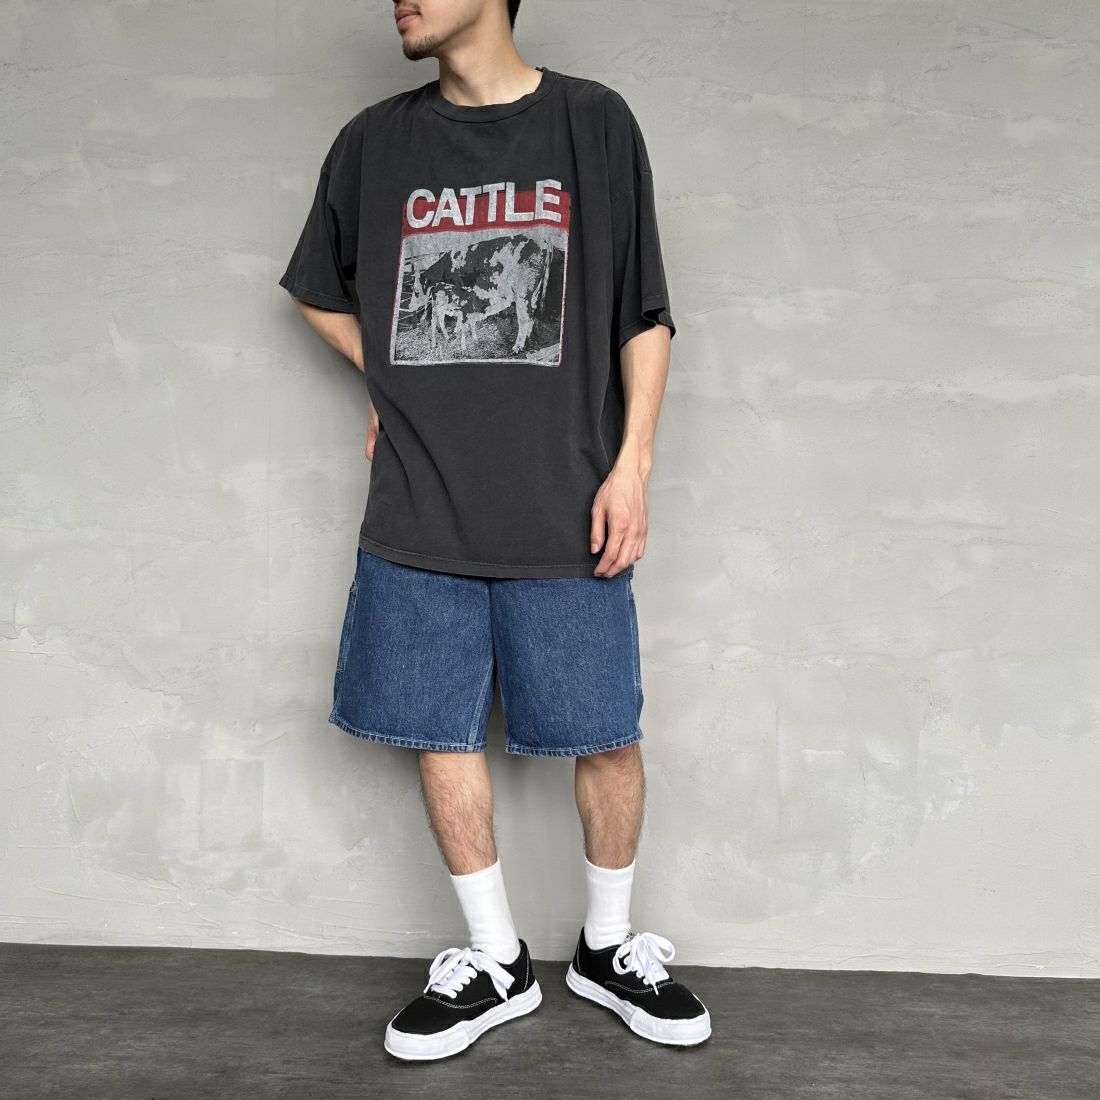 REMI RELIEF [レミレリーフ] 別注 ビッグプリントTシャツ CATTLE [RN26349305-JF] BLACK &&モデル身長：168cm 着用サイズ：M&&